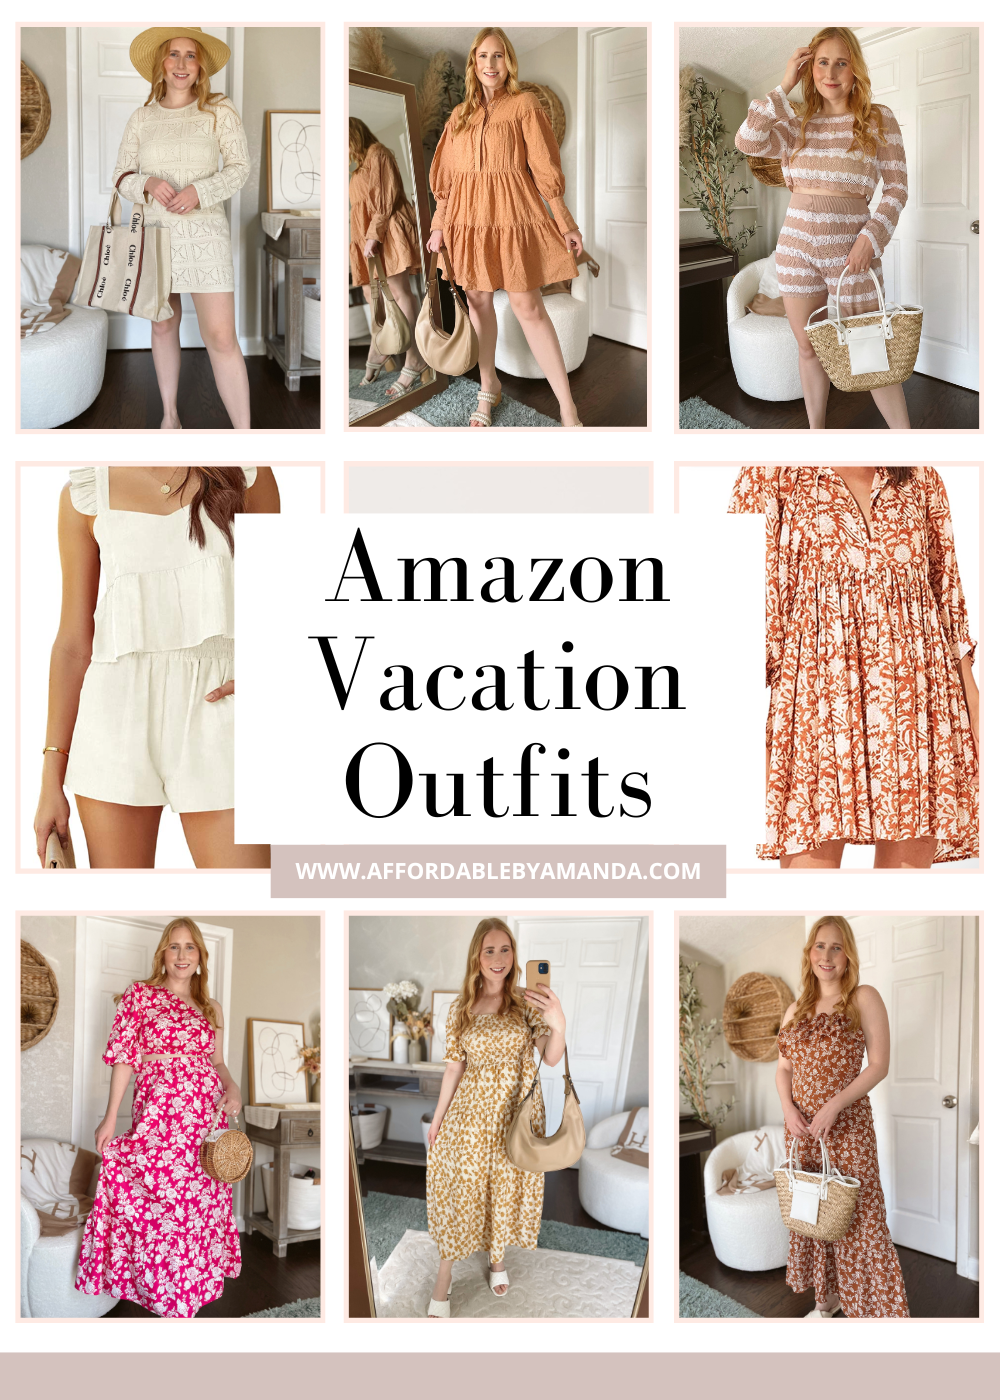 Vacation Outfits - Affordable by Amanda